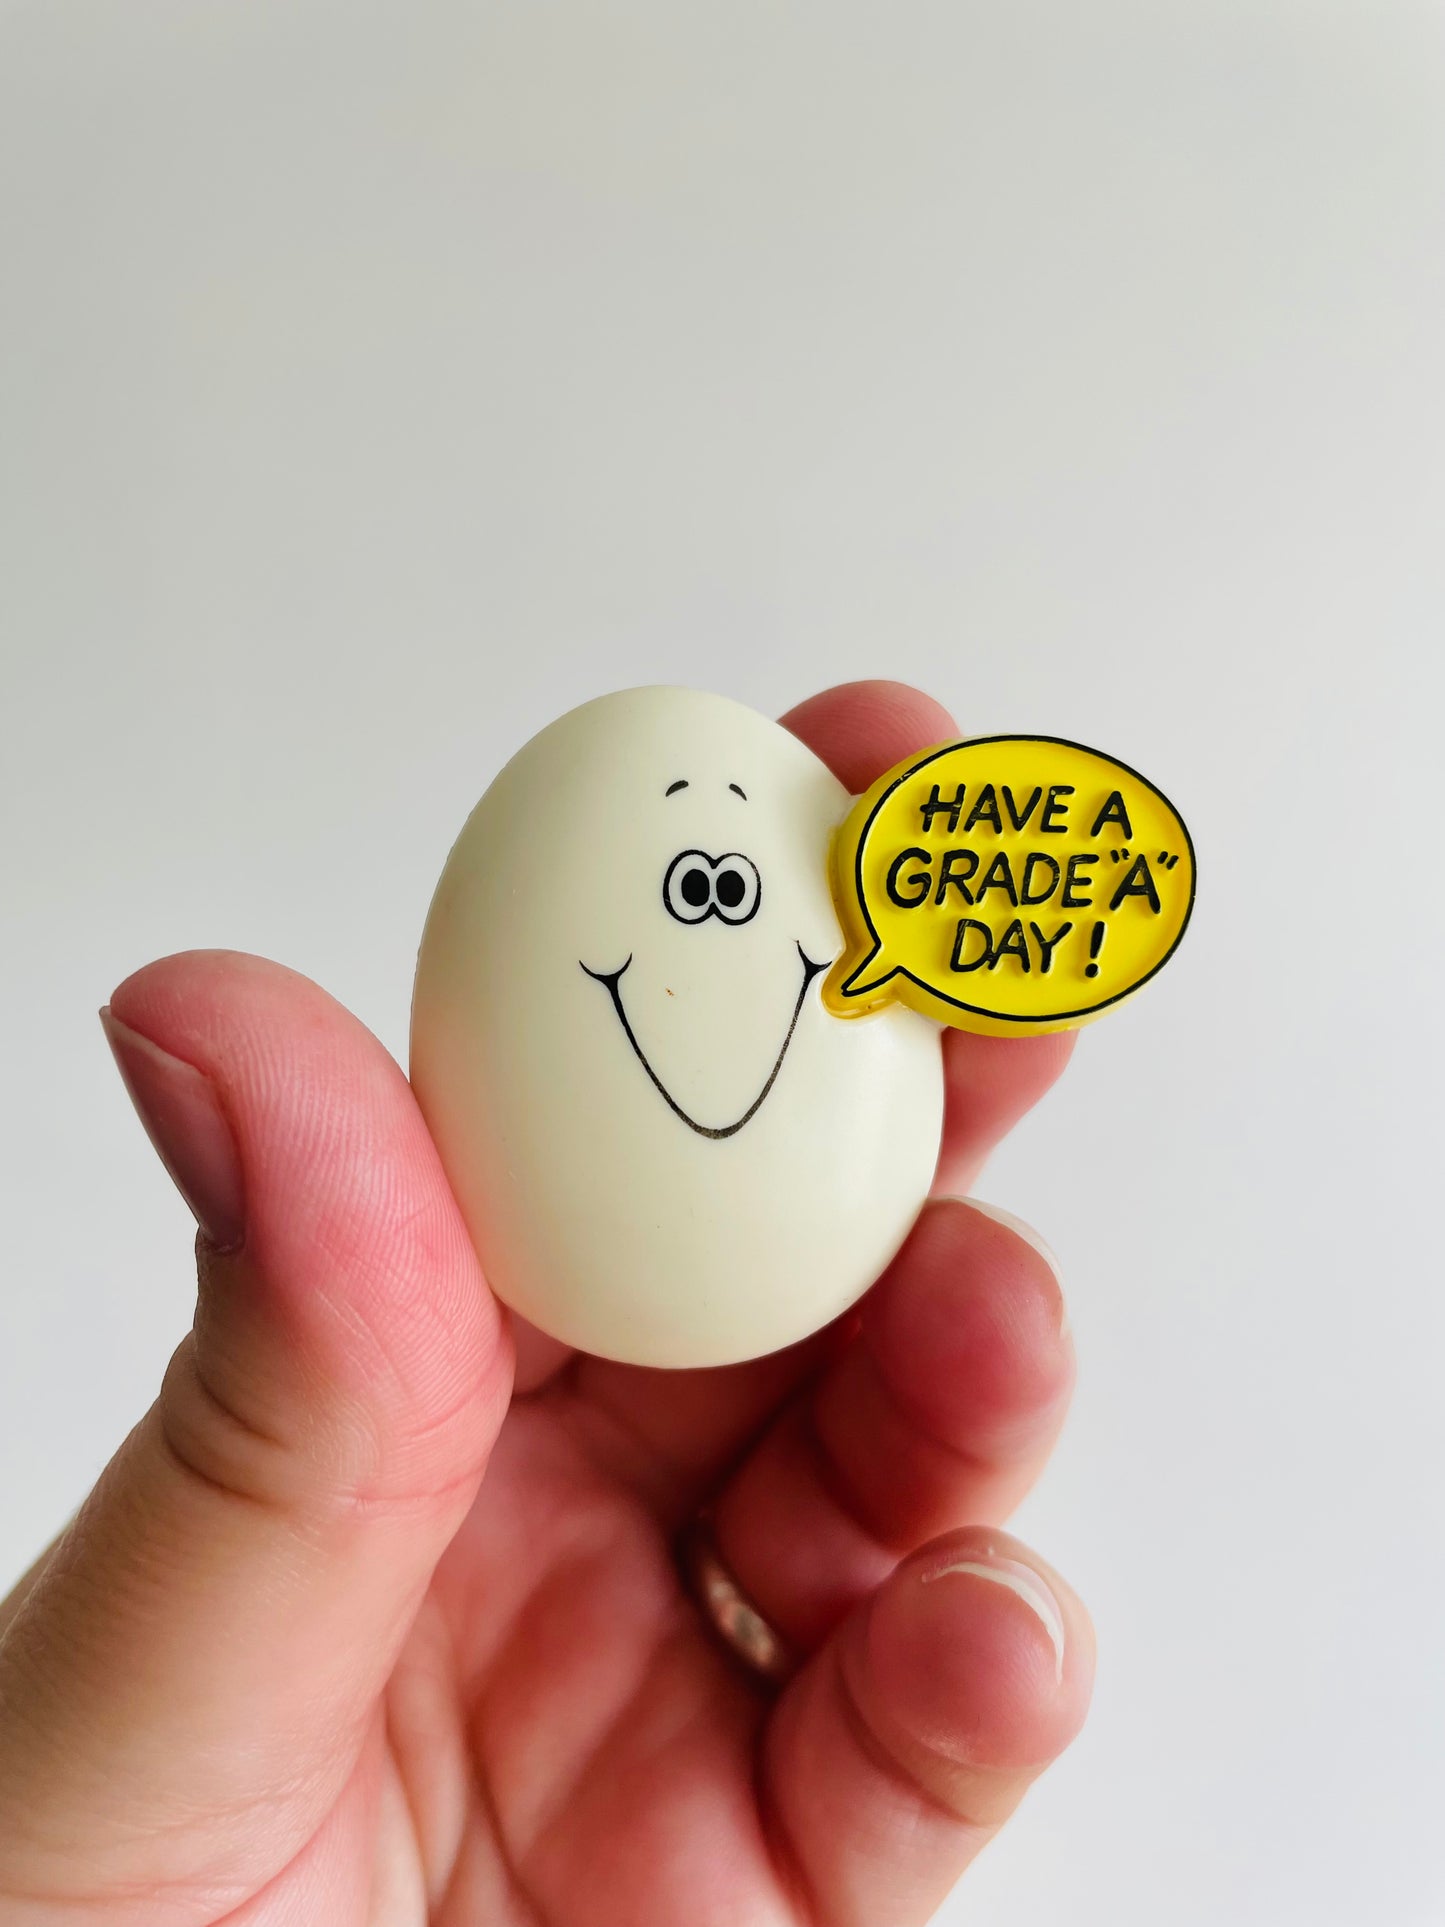 Easter Holiday Pin - Egg Saying Have a Grade A Day! - Hallmark Cards